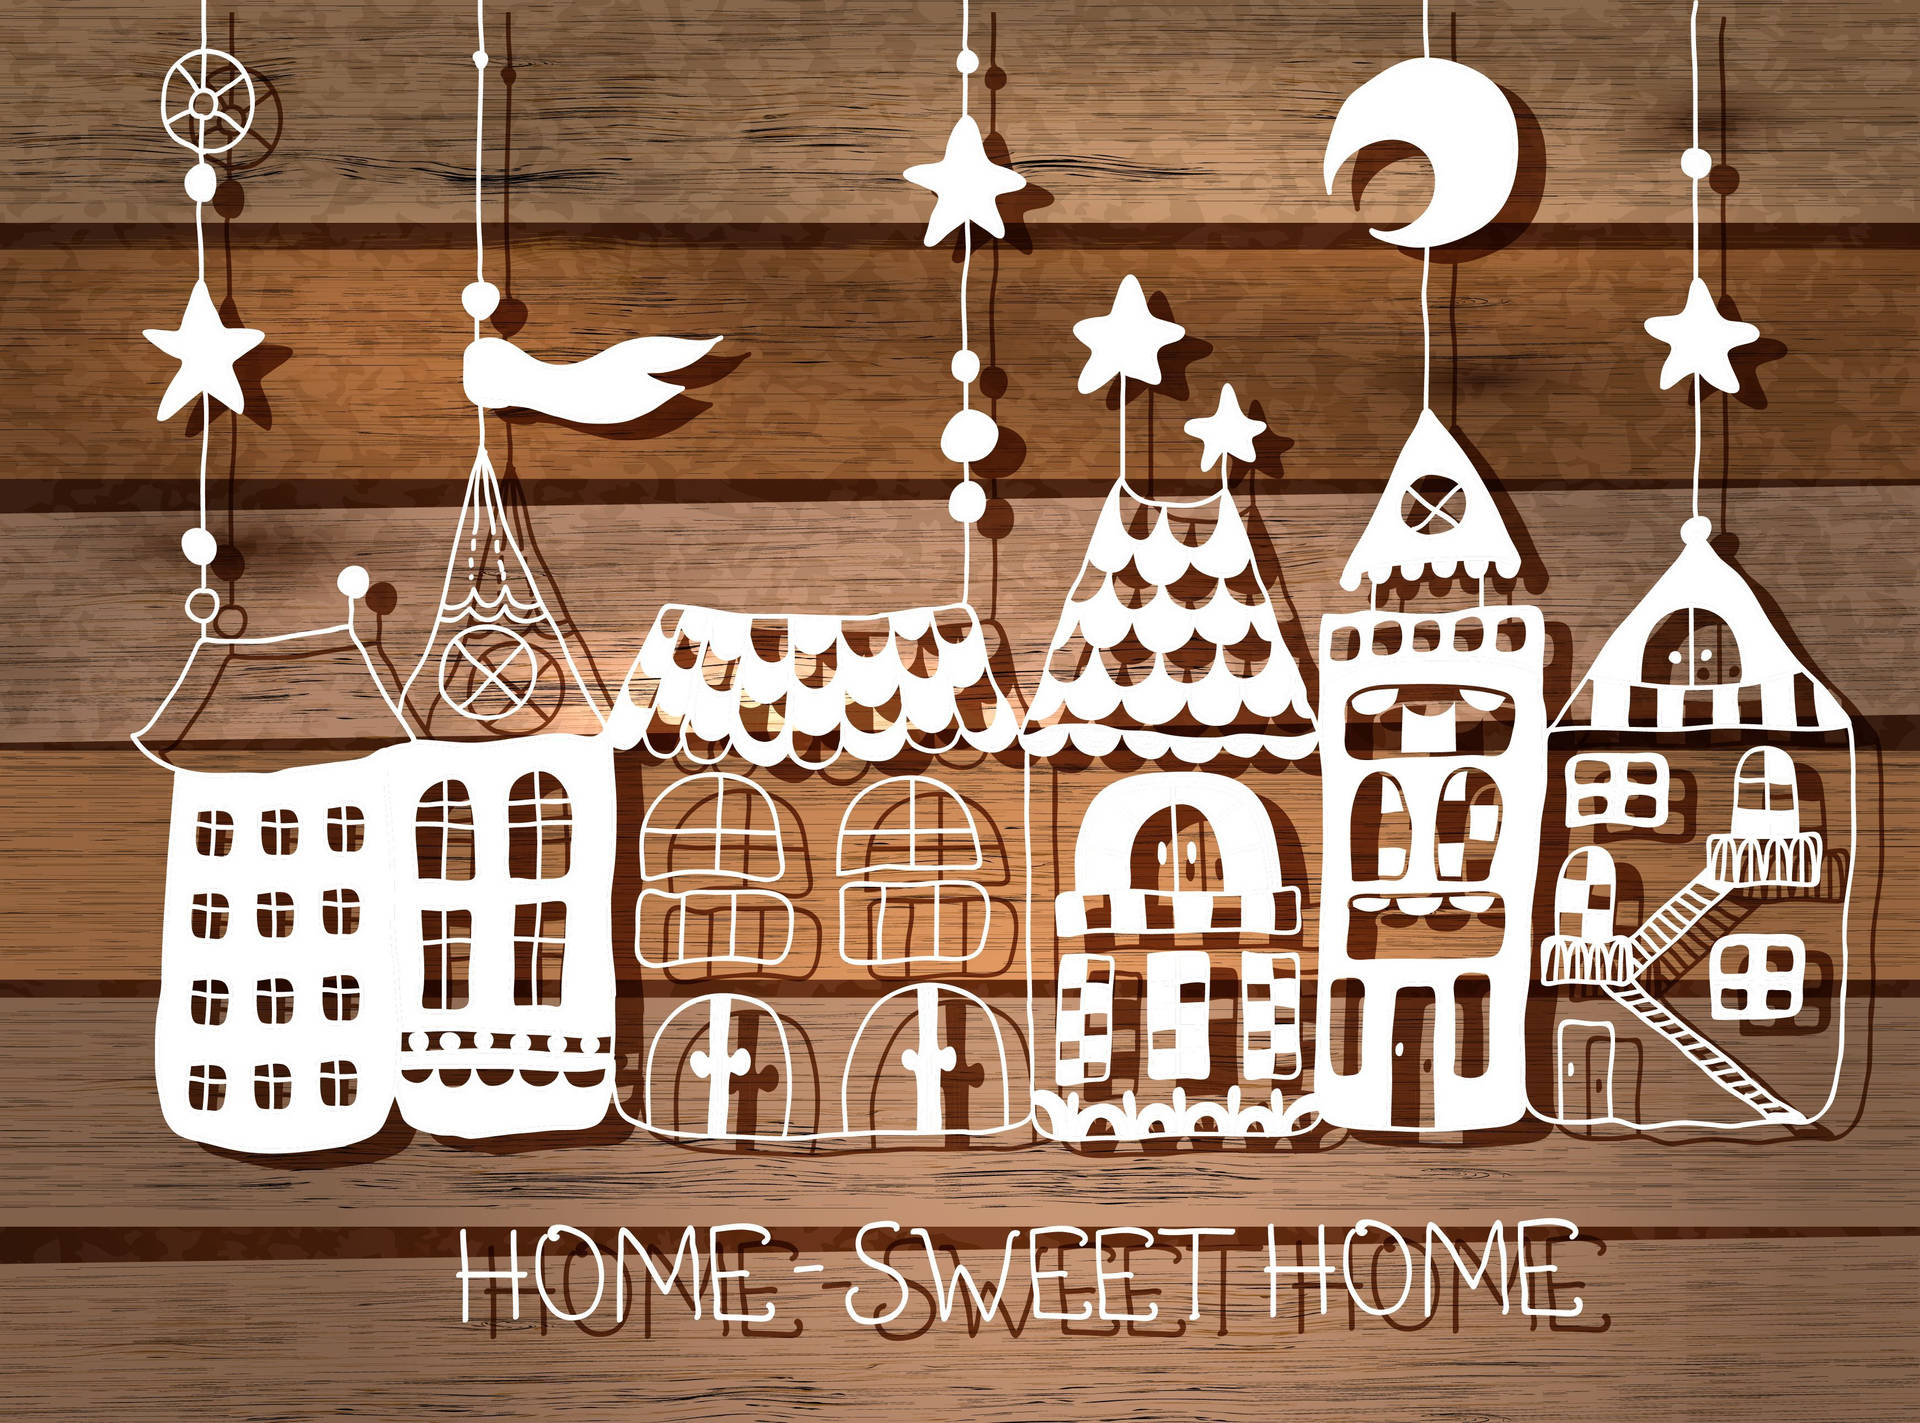 Free Home Sweet Home Wallpaper Downloads, [100+] Home Sweet Home Wallpapers  for FREE 